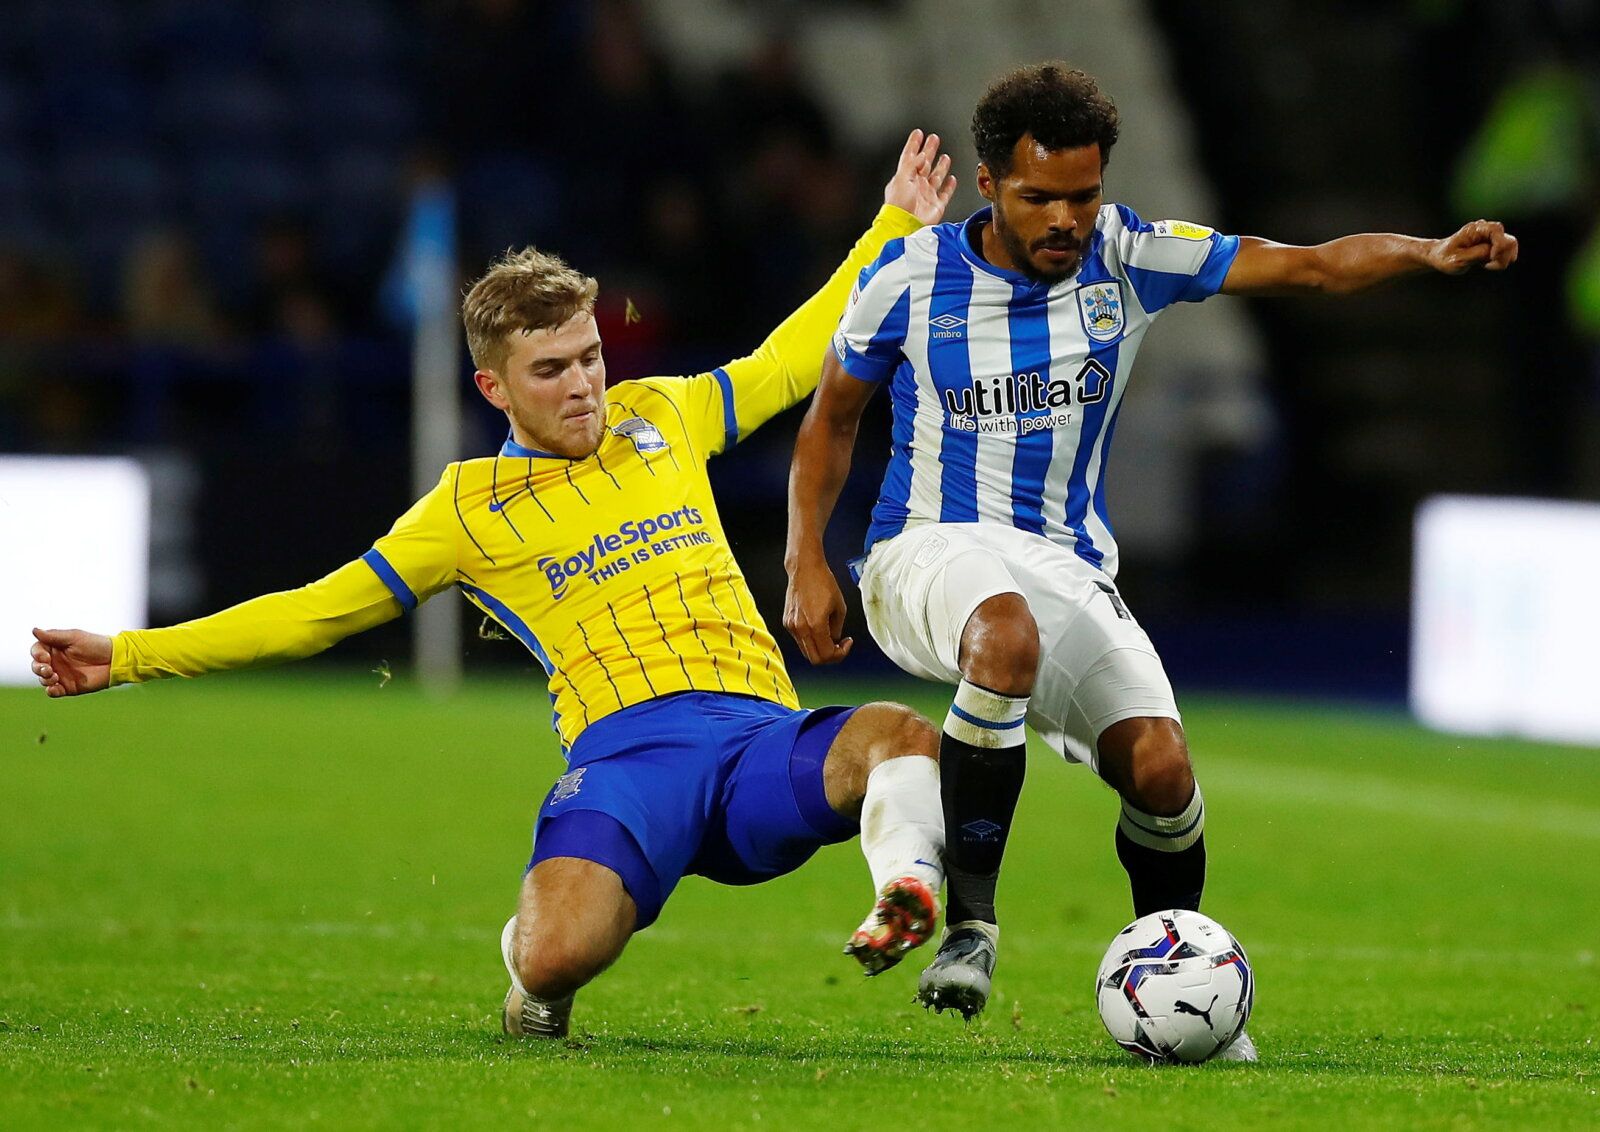 Soccer Football - Championship - Huddersfield Town v Birmingham City - John Smith's Stadium, Huddersfield, Britain - October 20, 2021  Birmingham City's Riley McGree in action with Huddersfield Town's Duane Holmes  Action Images/Jason Cairnduff  EDITORIAL USE ONLY. No use with unauthorized audio, video, data, fixture lists, club/league logos or 